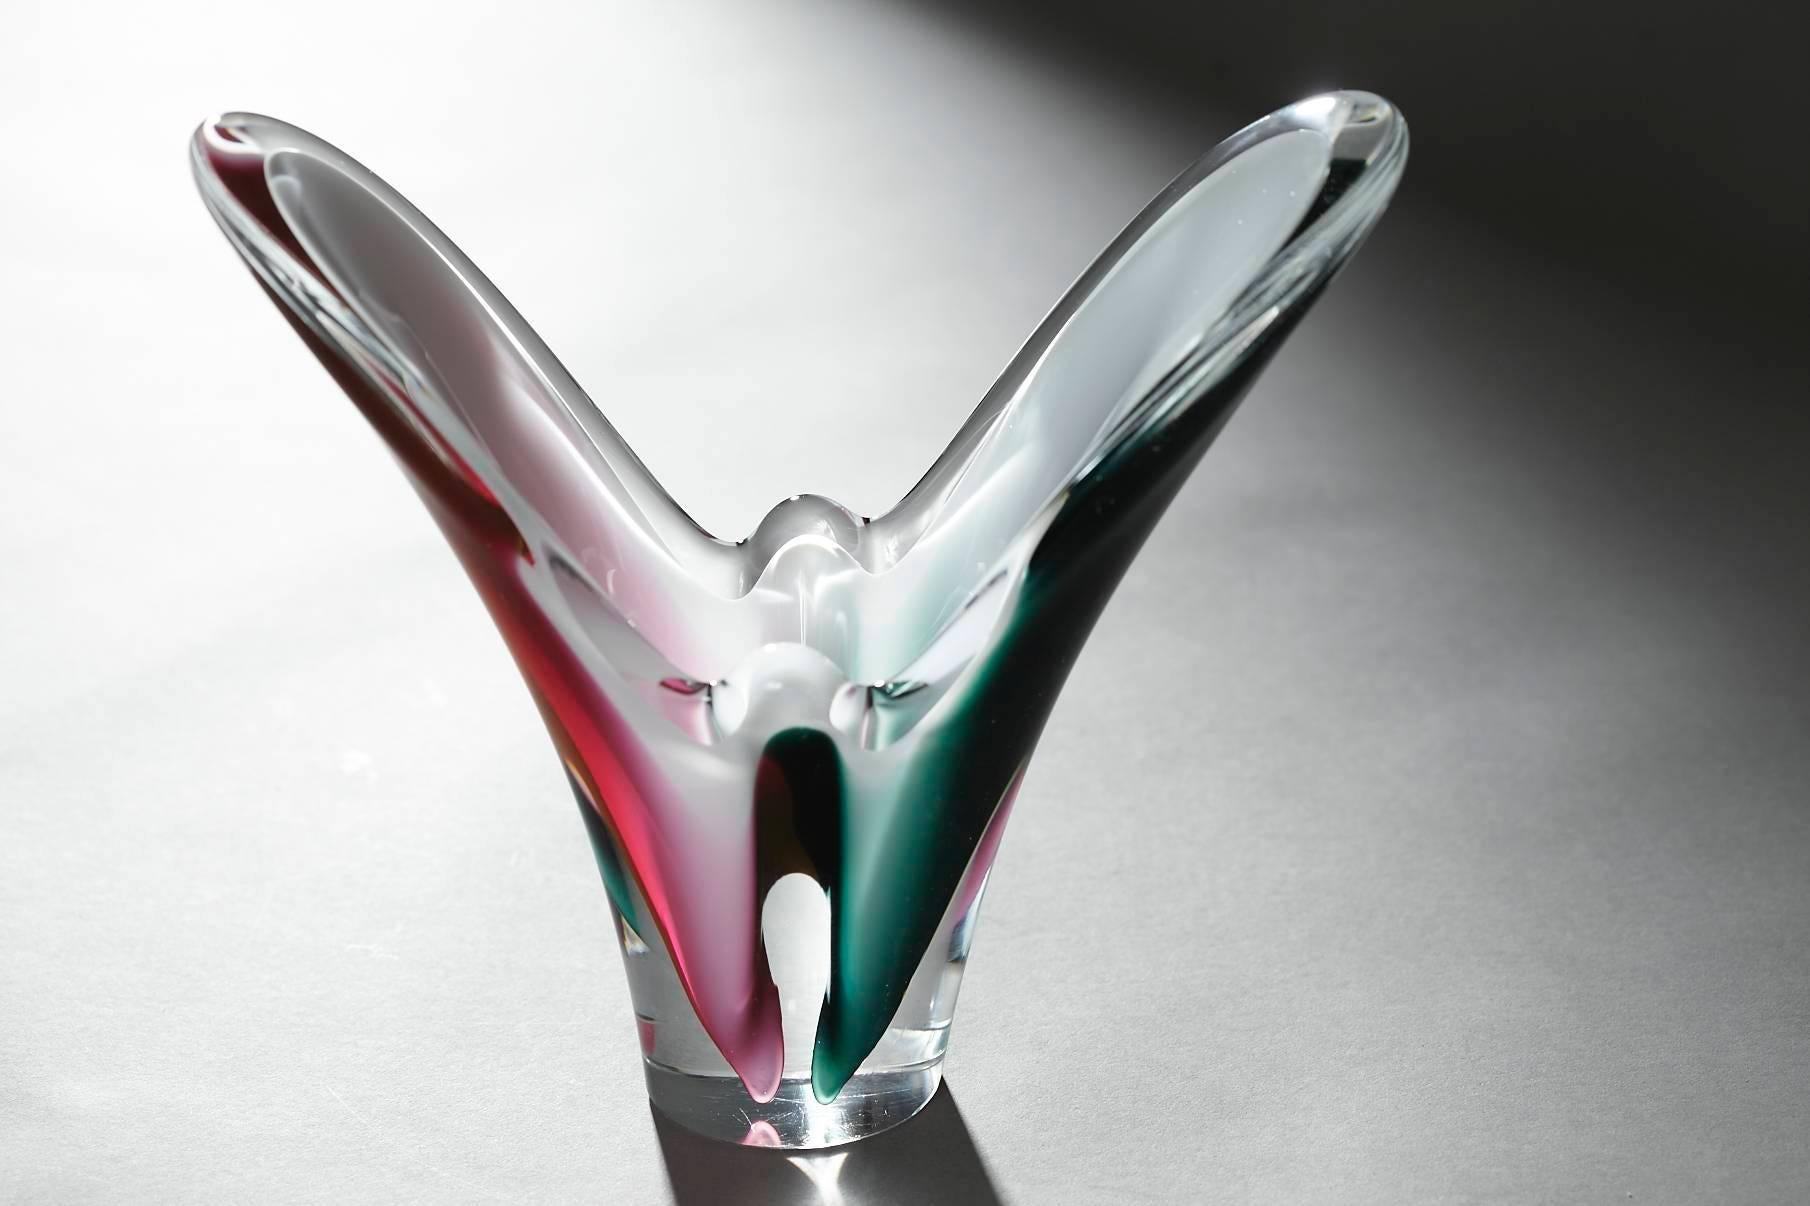 Large art glass vase designed by Paul Kedelv for his 'coquille' series. 
These pieces don't have any useful purpose besides being purely beautiful pieces of art.
Dark pink, green and white submerge (Sommerso) under a thick glass